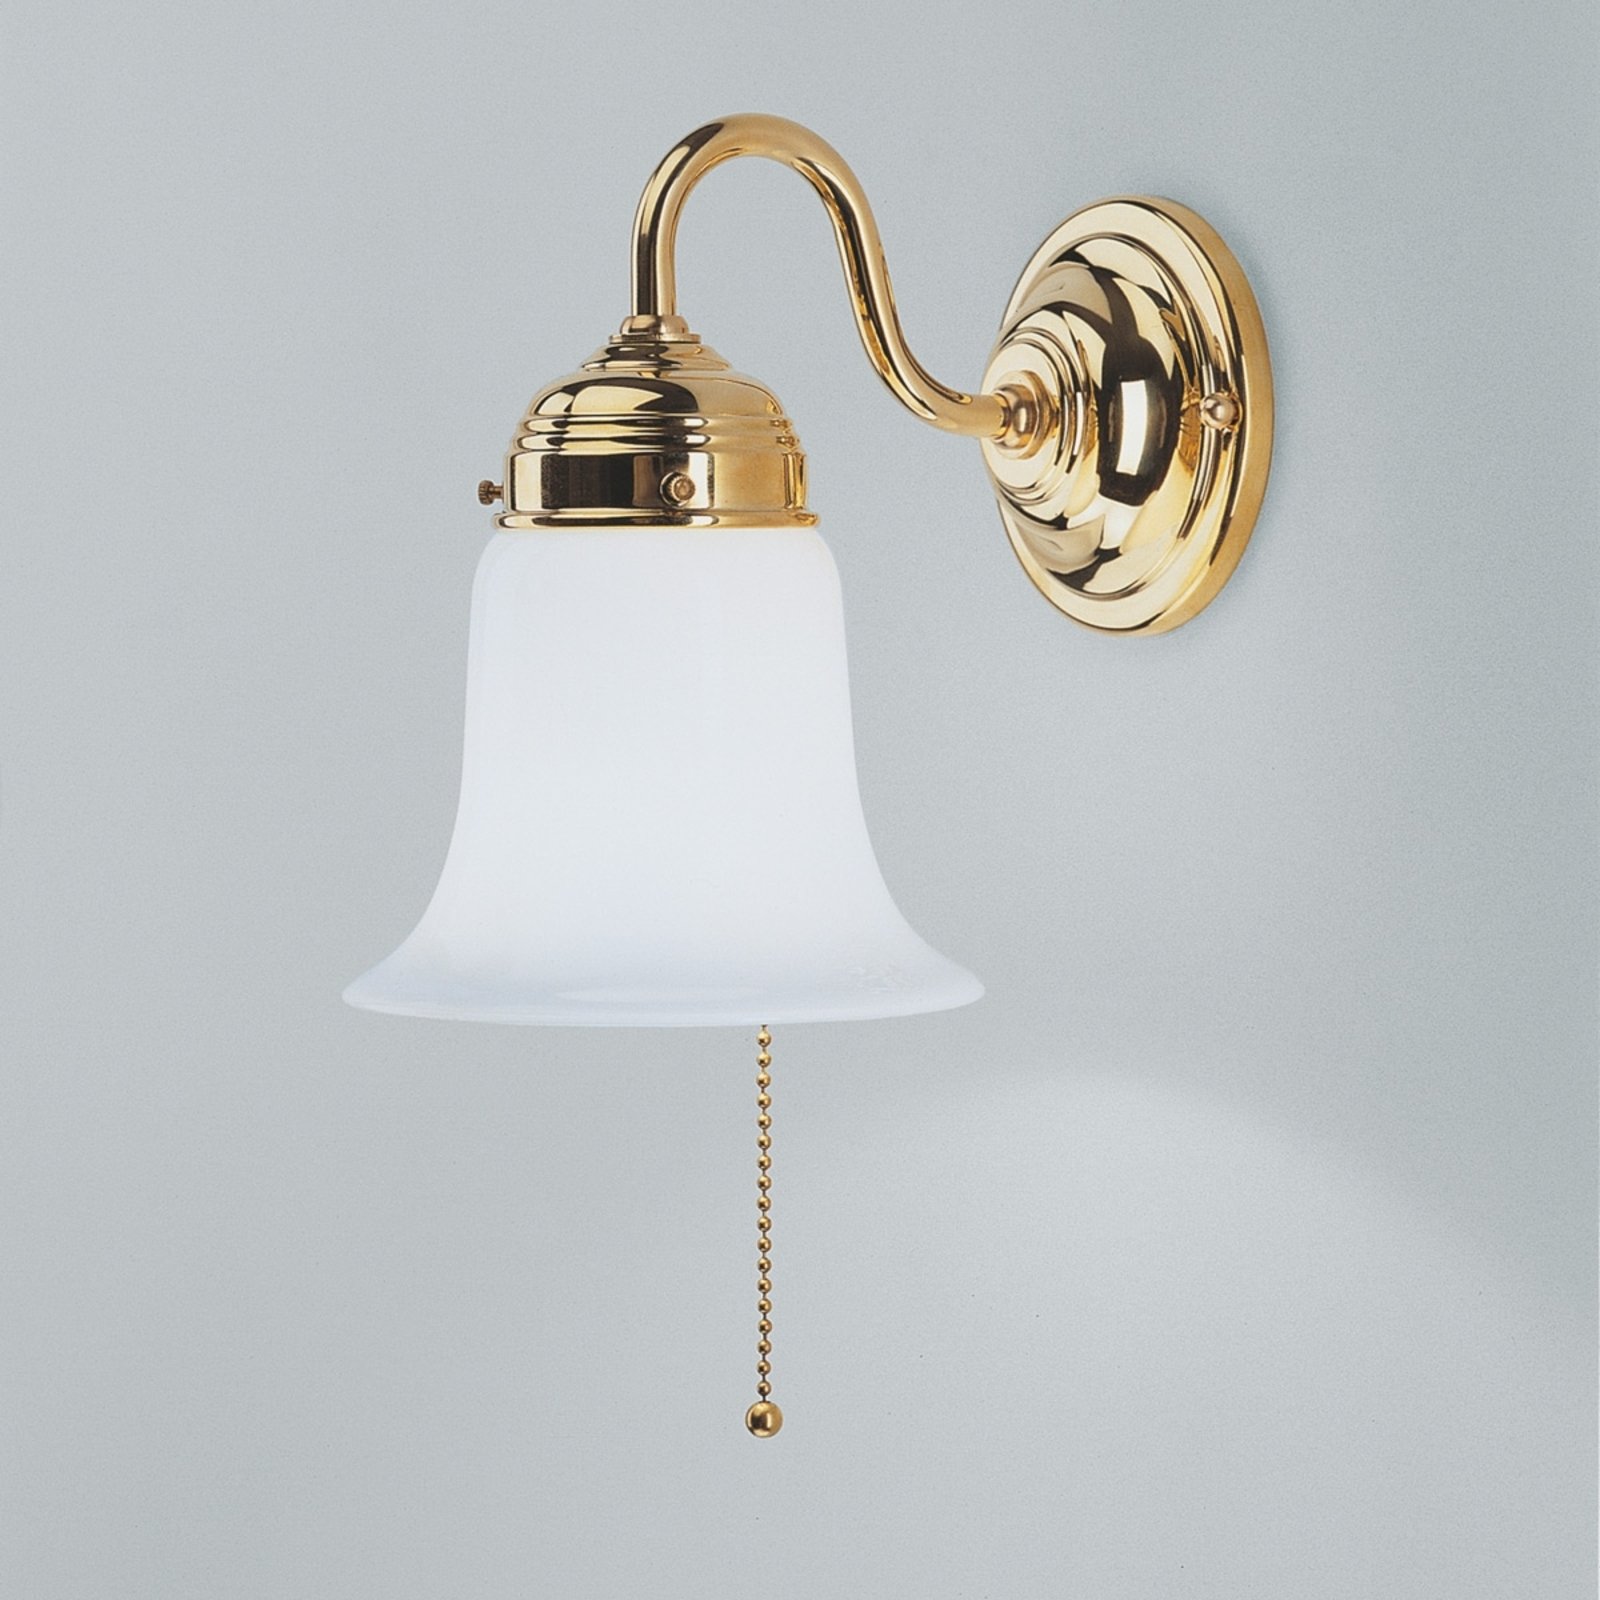 Sibille polished brass wall light